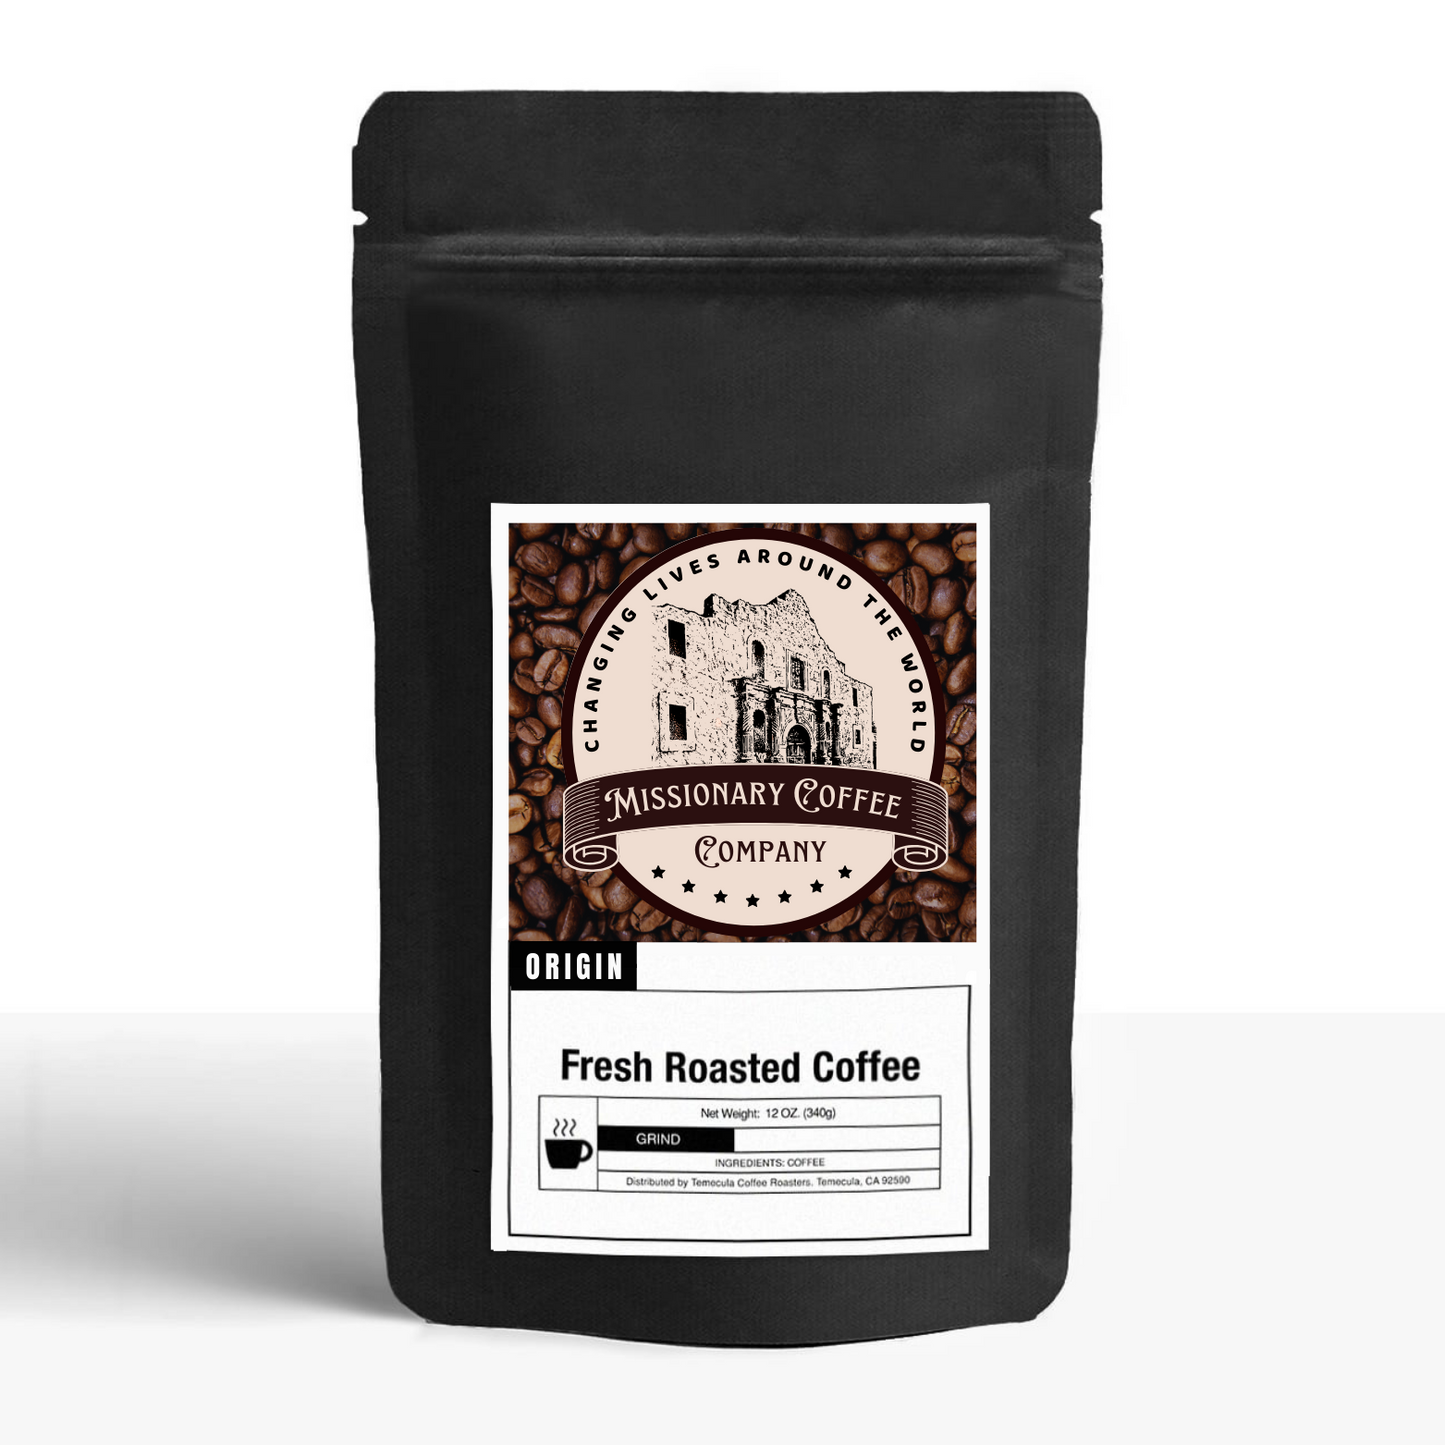   Missionary Coffee Company - Fresh Roasted Coffee - Front Packet